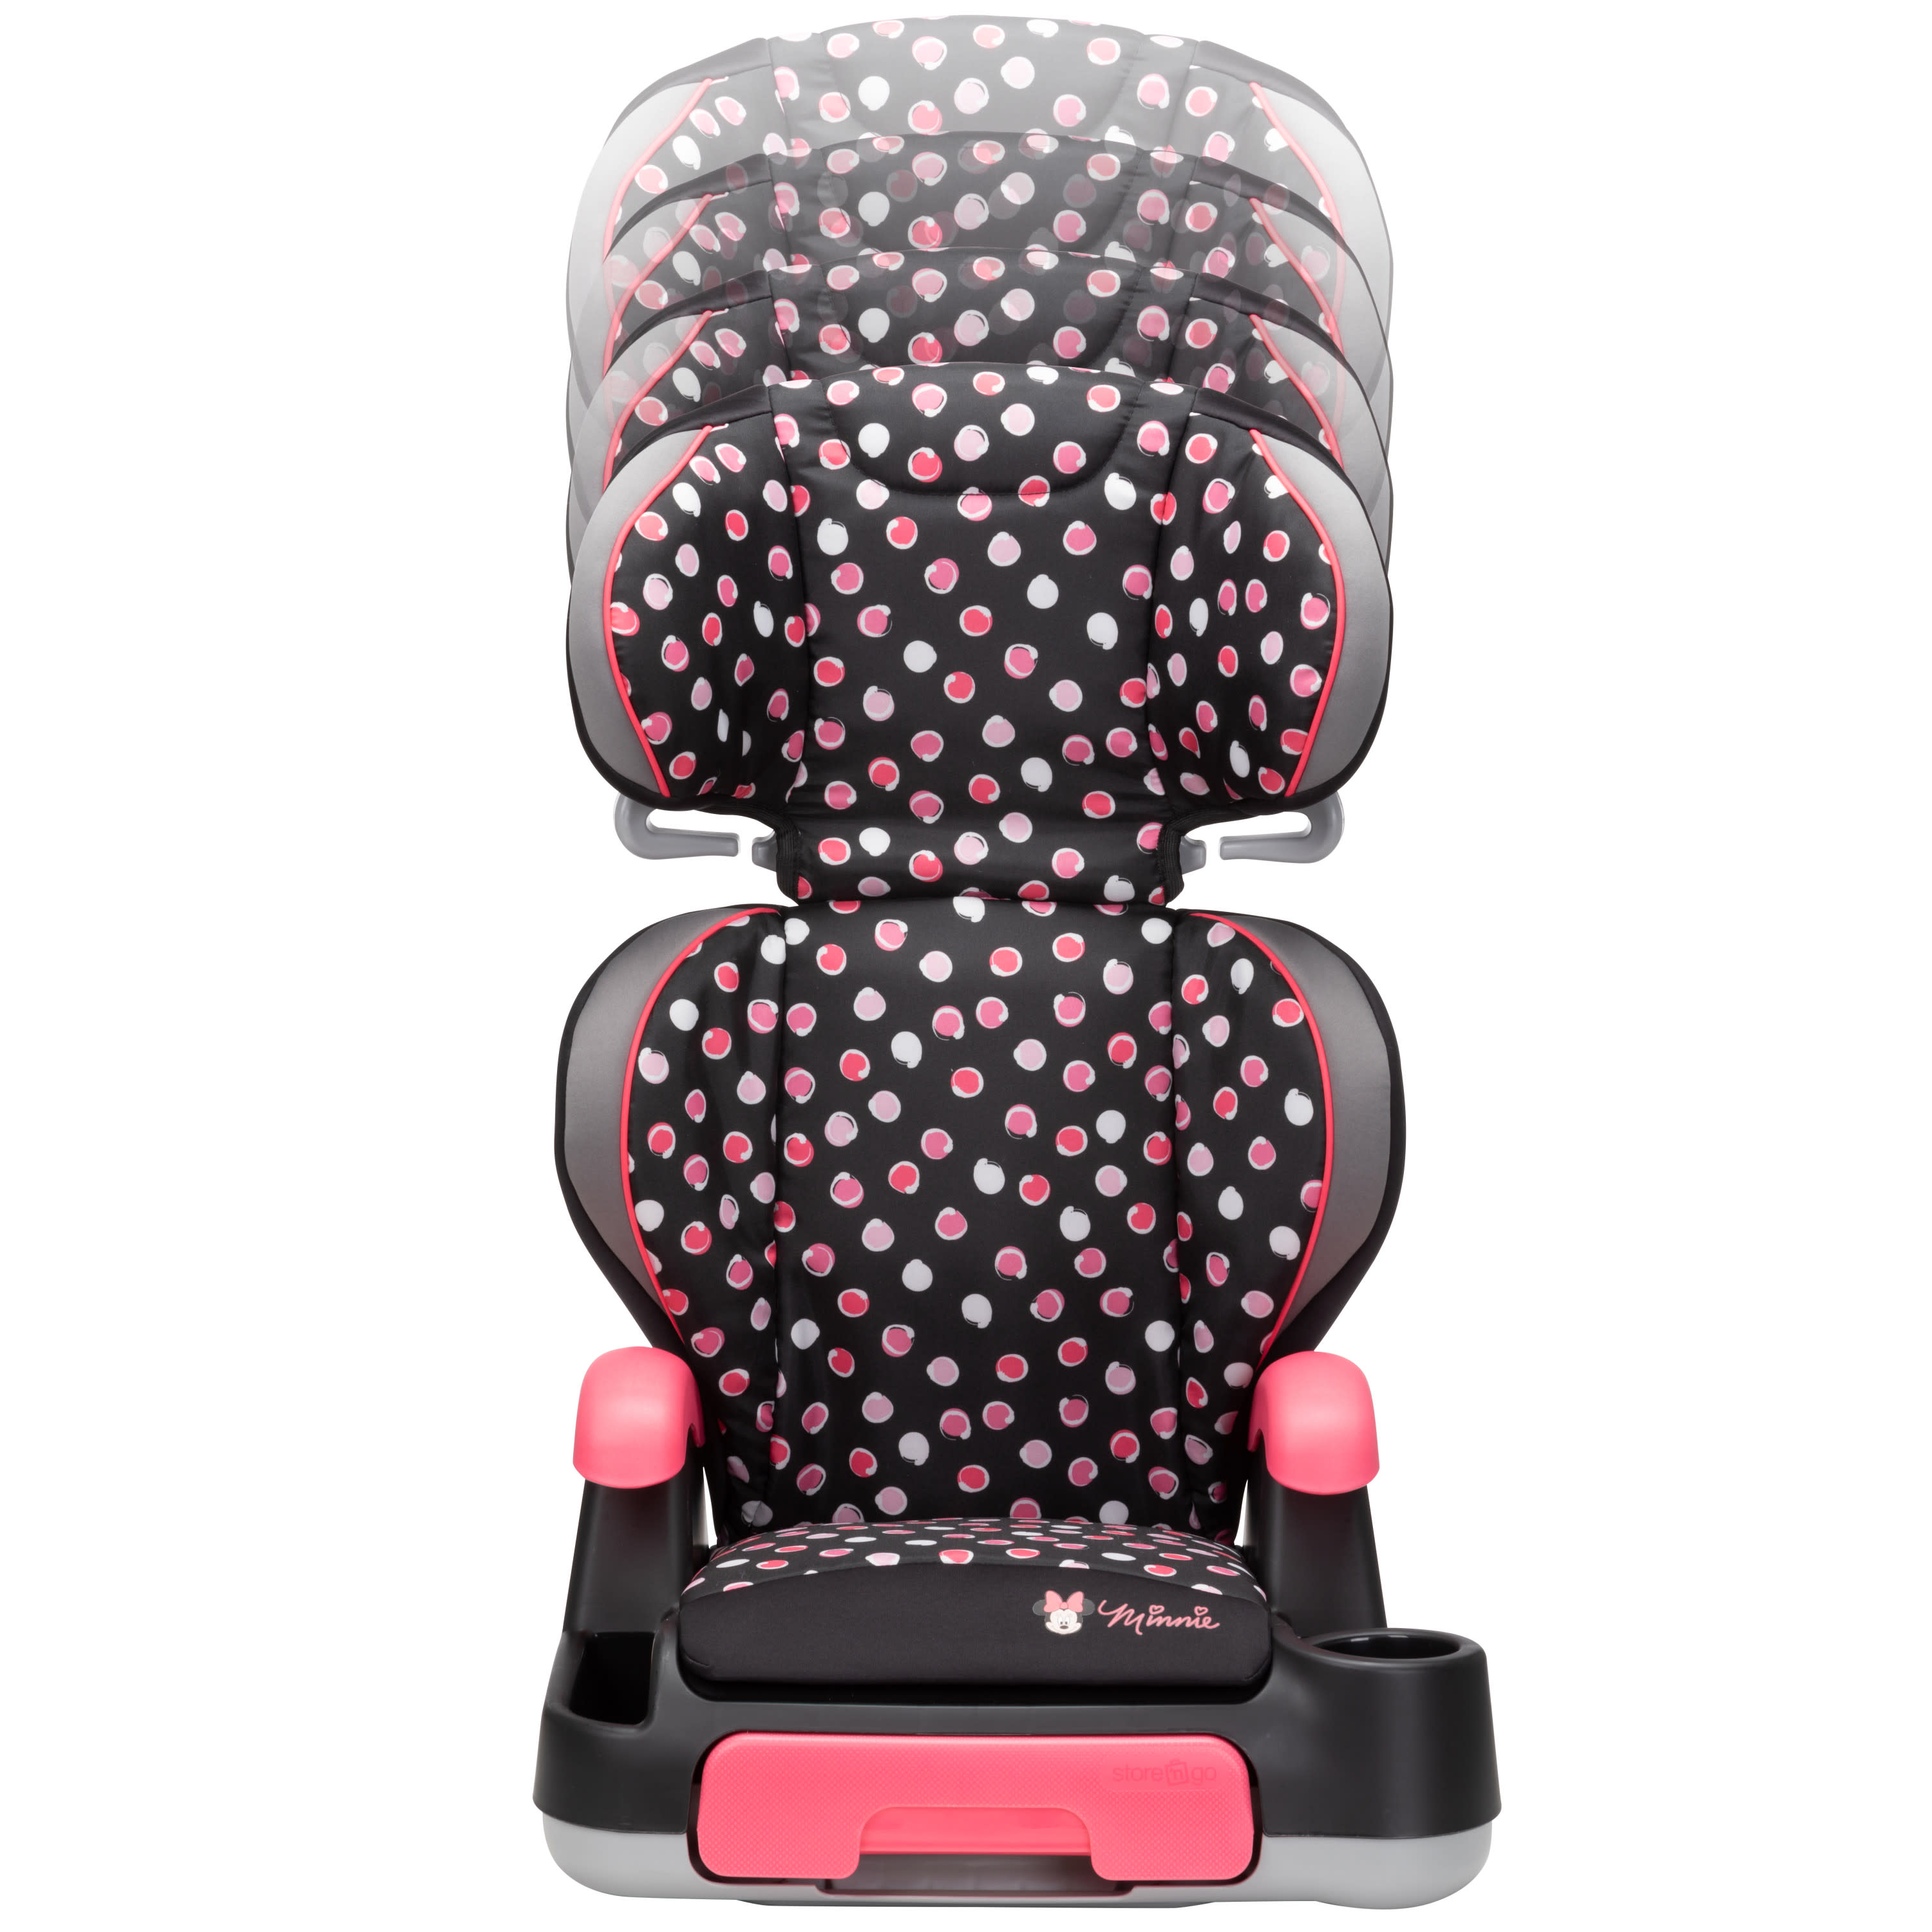 Disney Baby Store 'n Go Sport Booster Car Seat, Minnie Mash Up - image 12 of 21